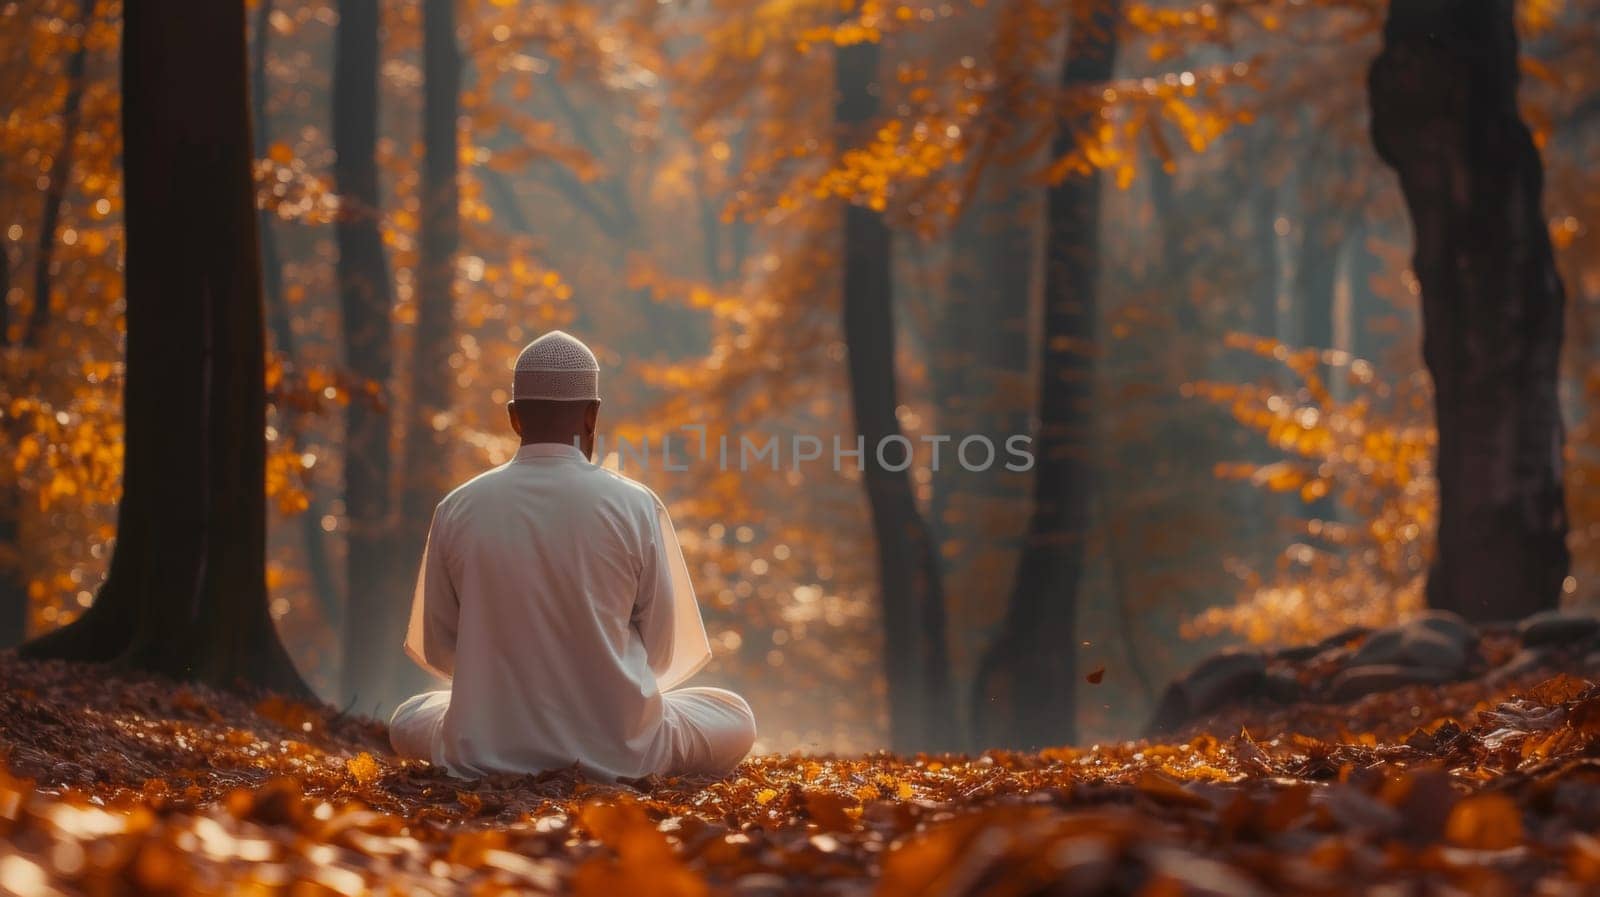 A man sitting in the middle of a forest with leaves on the ground